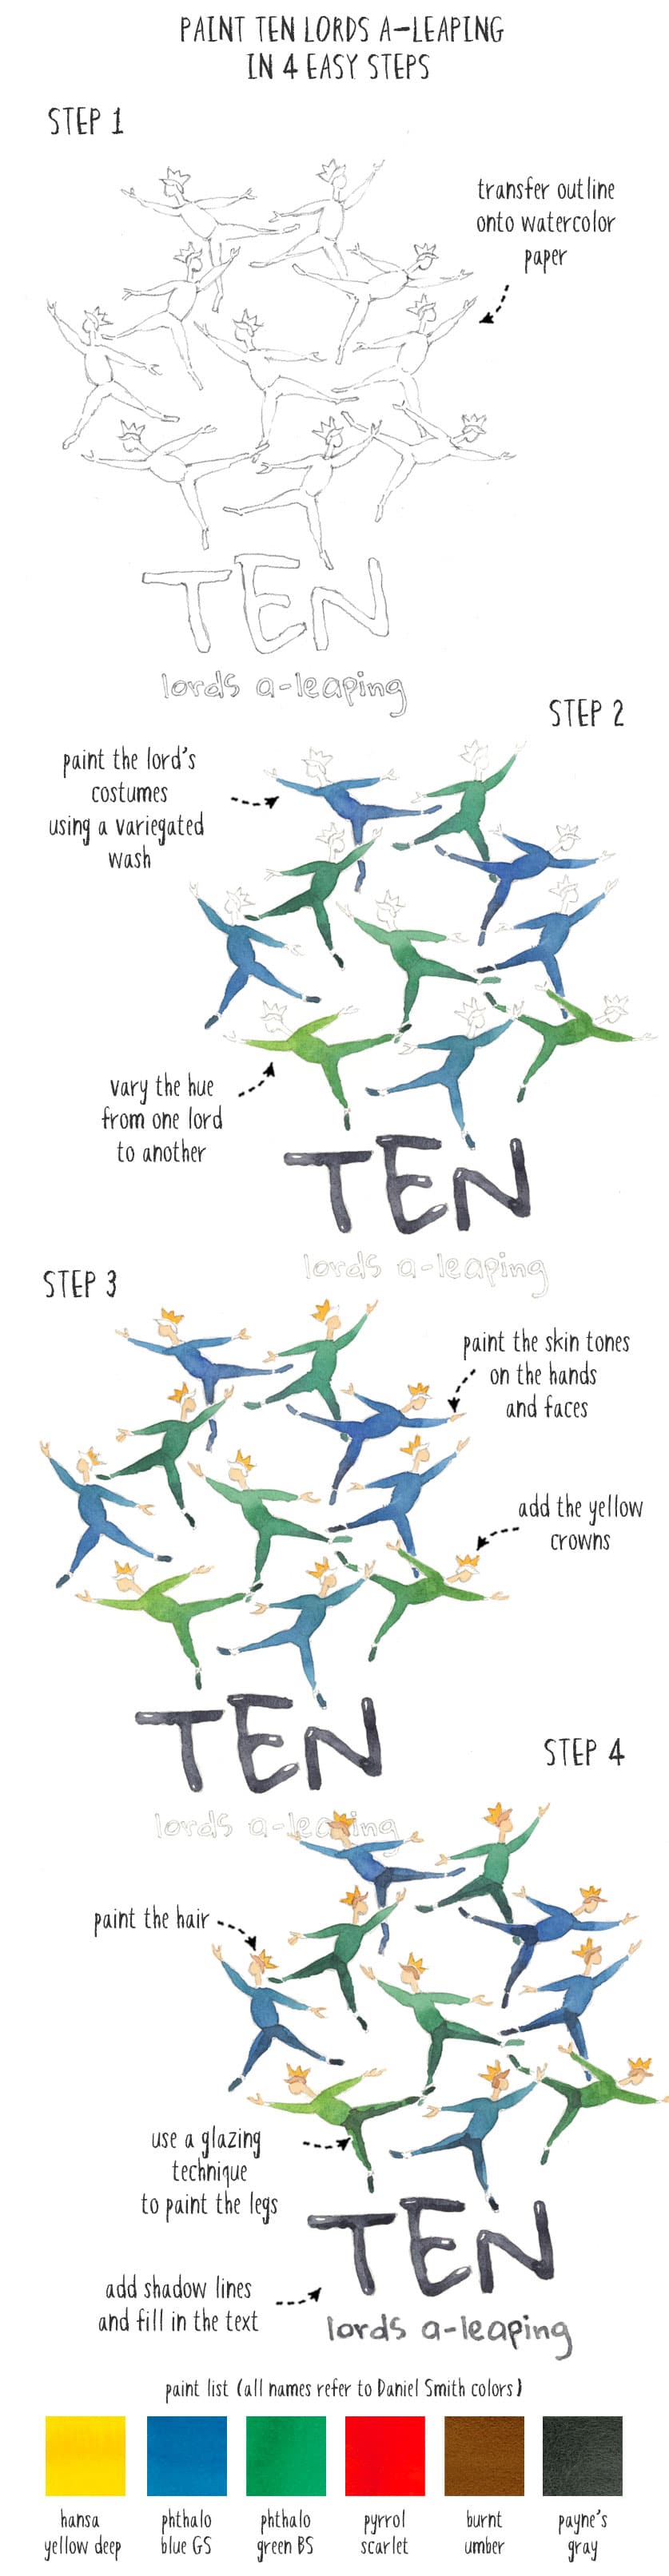 ten lords a leaping 4 step painting process